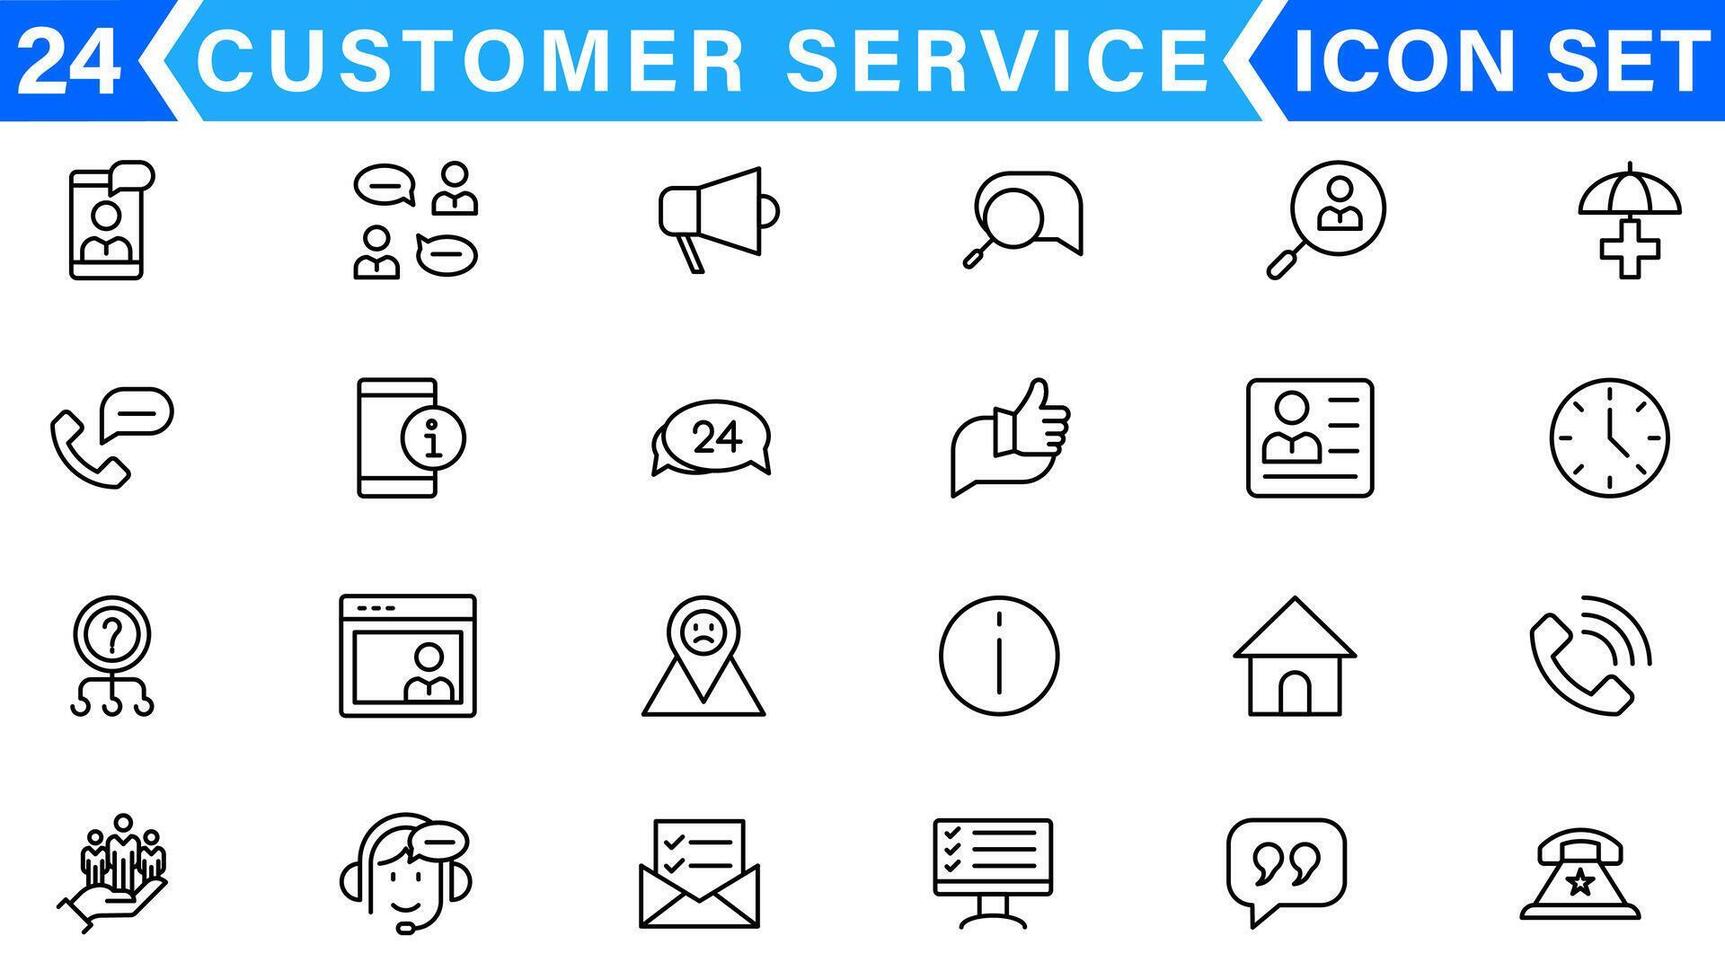 Customer service icon set. Containing customer satisfied, assistance, experience, feedback, operator and technical support icons vector